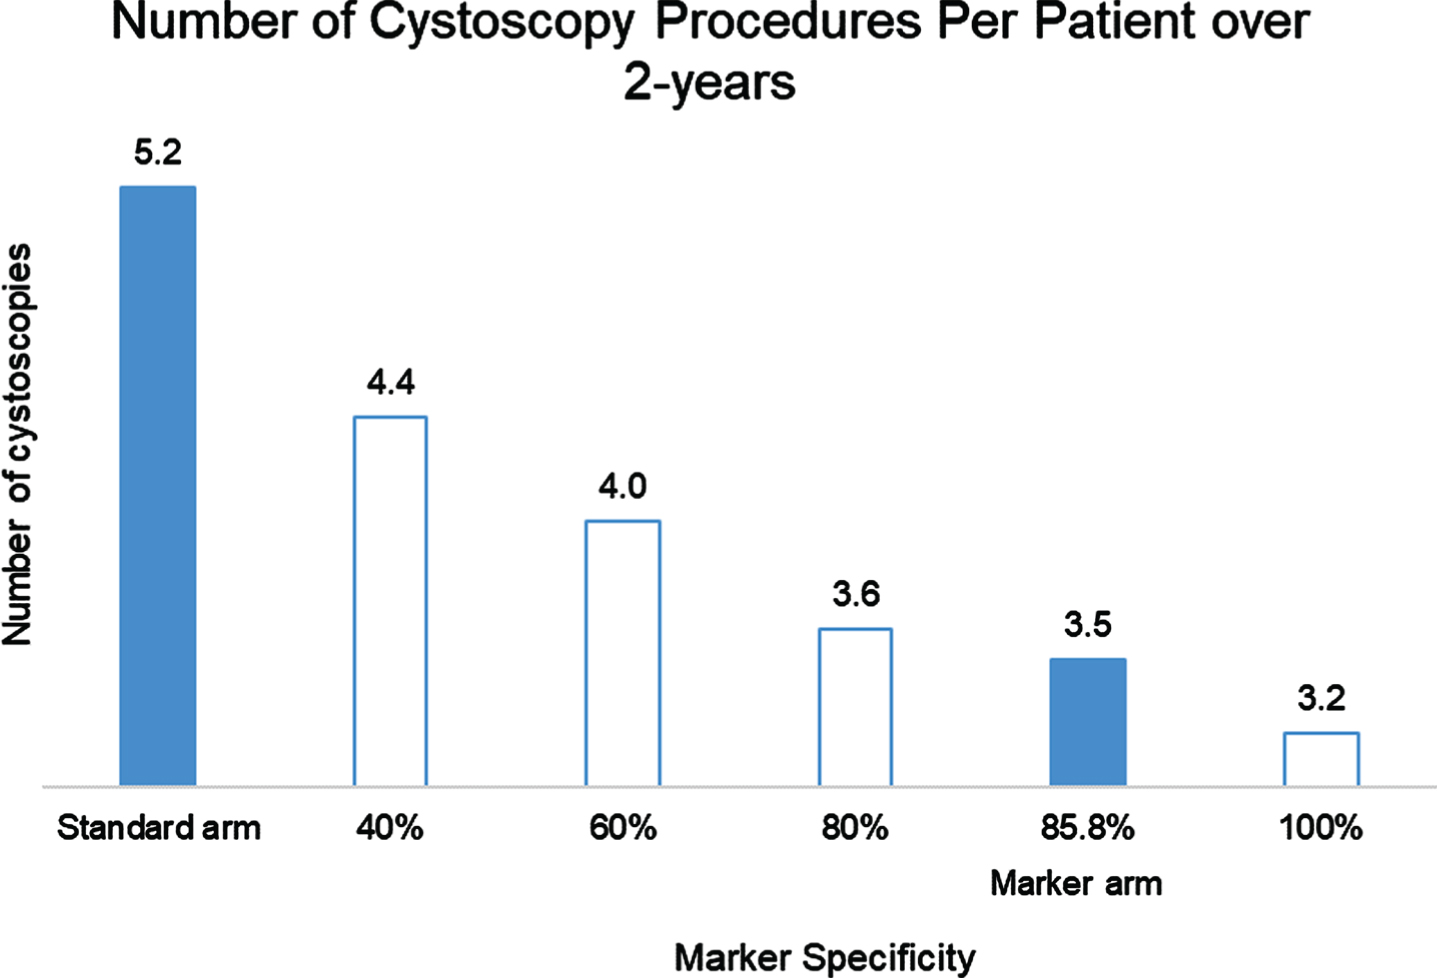 Number of cystoscopy procedures per patient over 2 years in Standard and Marker arms.